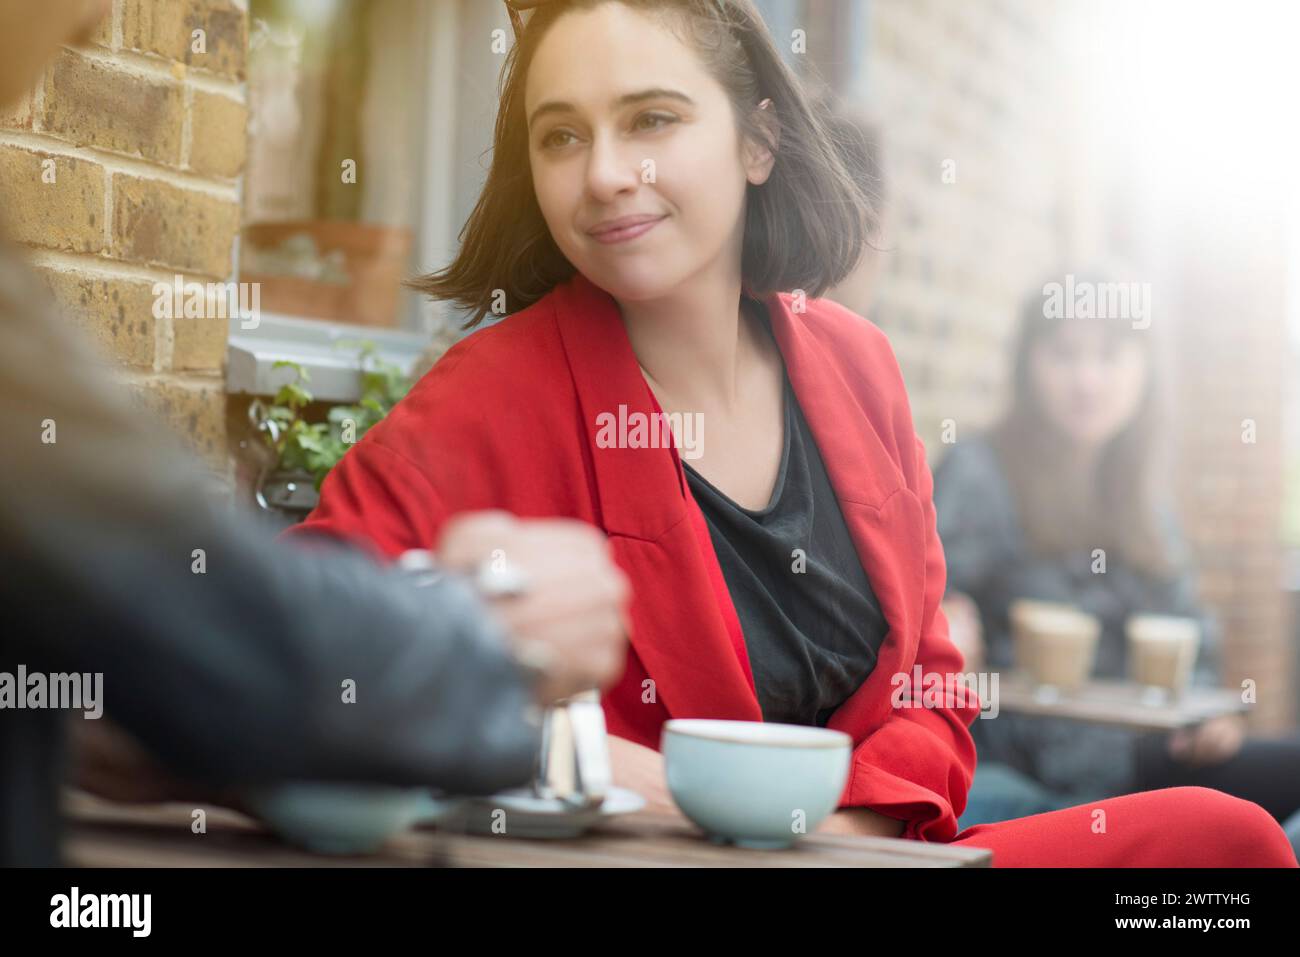 Woman in red blazer at a cafe Stock Photo